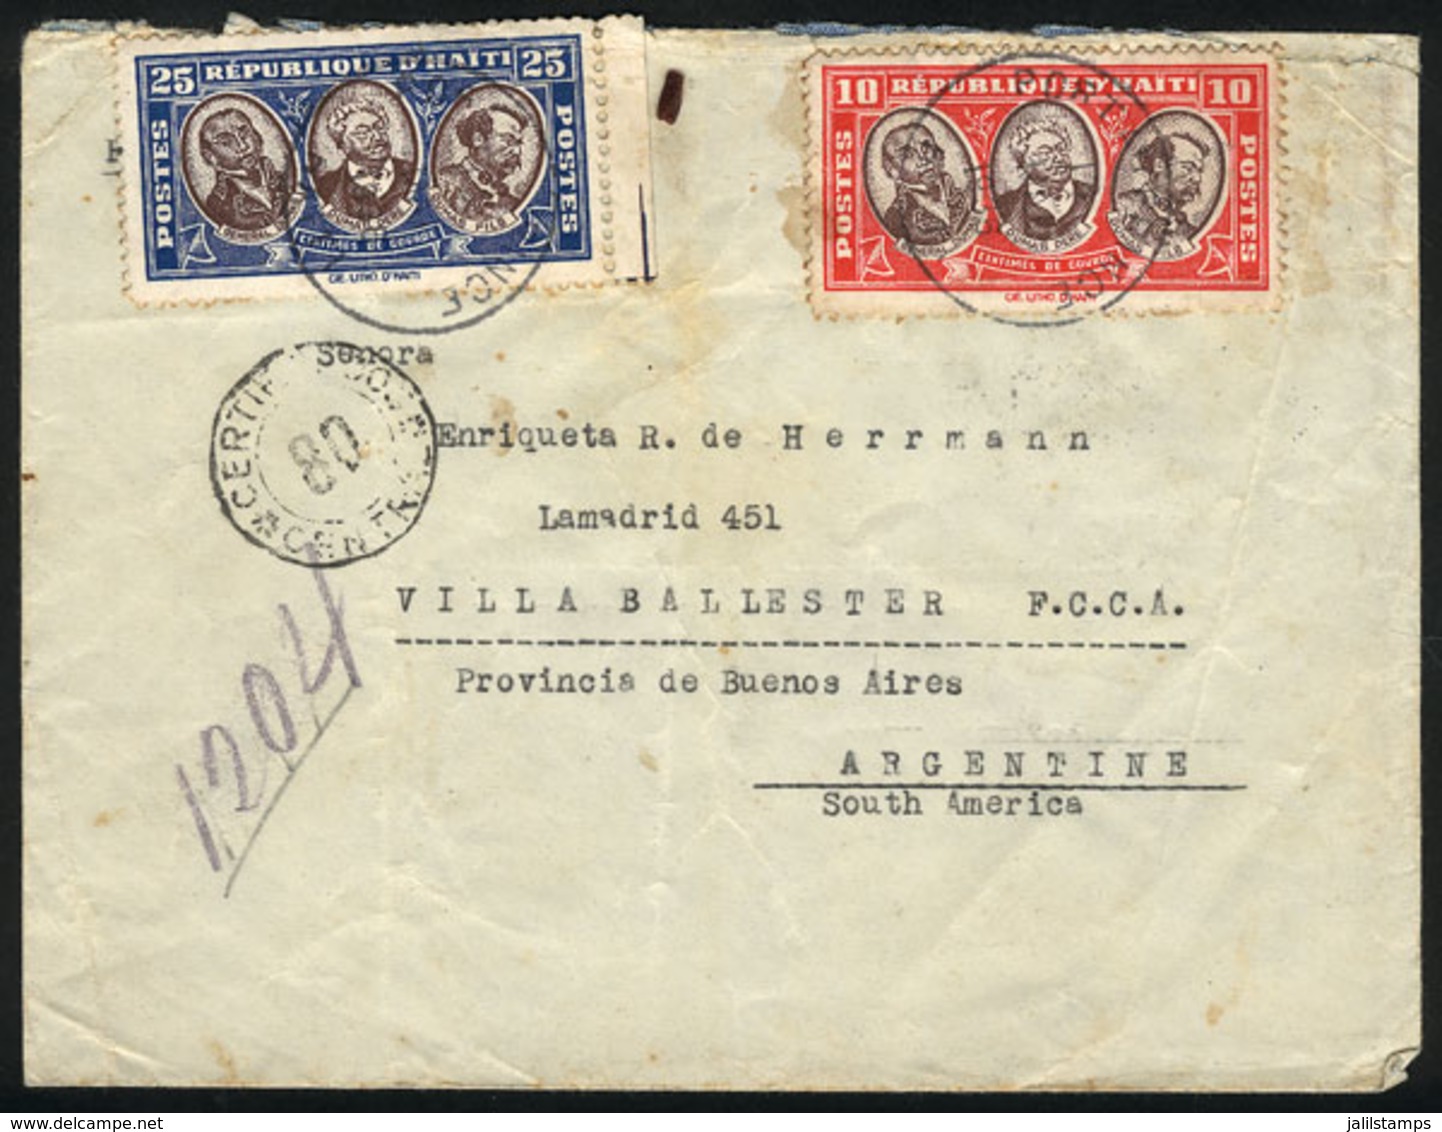 HAITI: Registered Cover Sent From Port-Au-Prince To Buenos Aires On 13/MAY/1936 Franked With 35c., With A Number Of Tran - Haïti